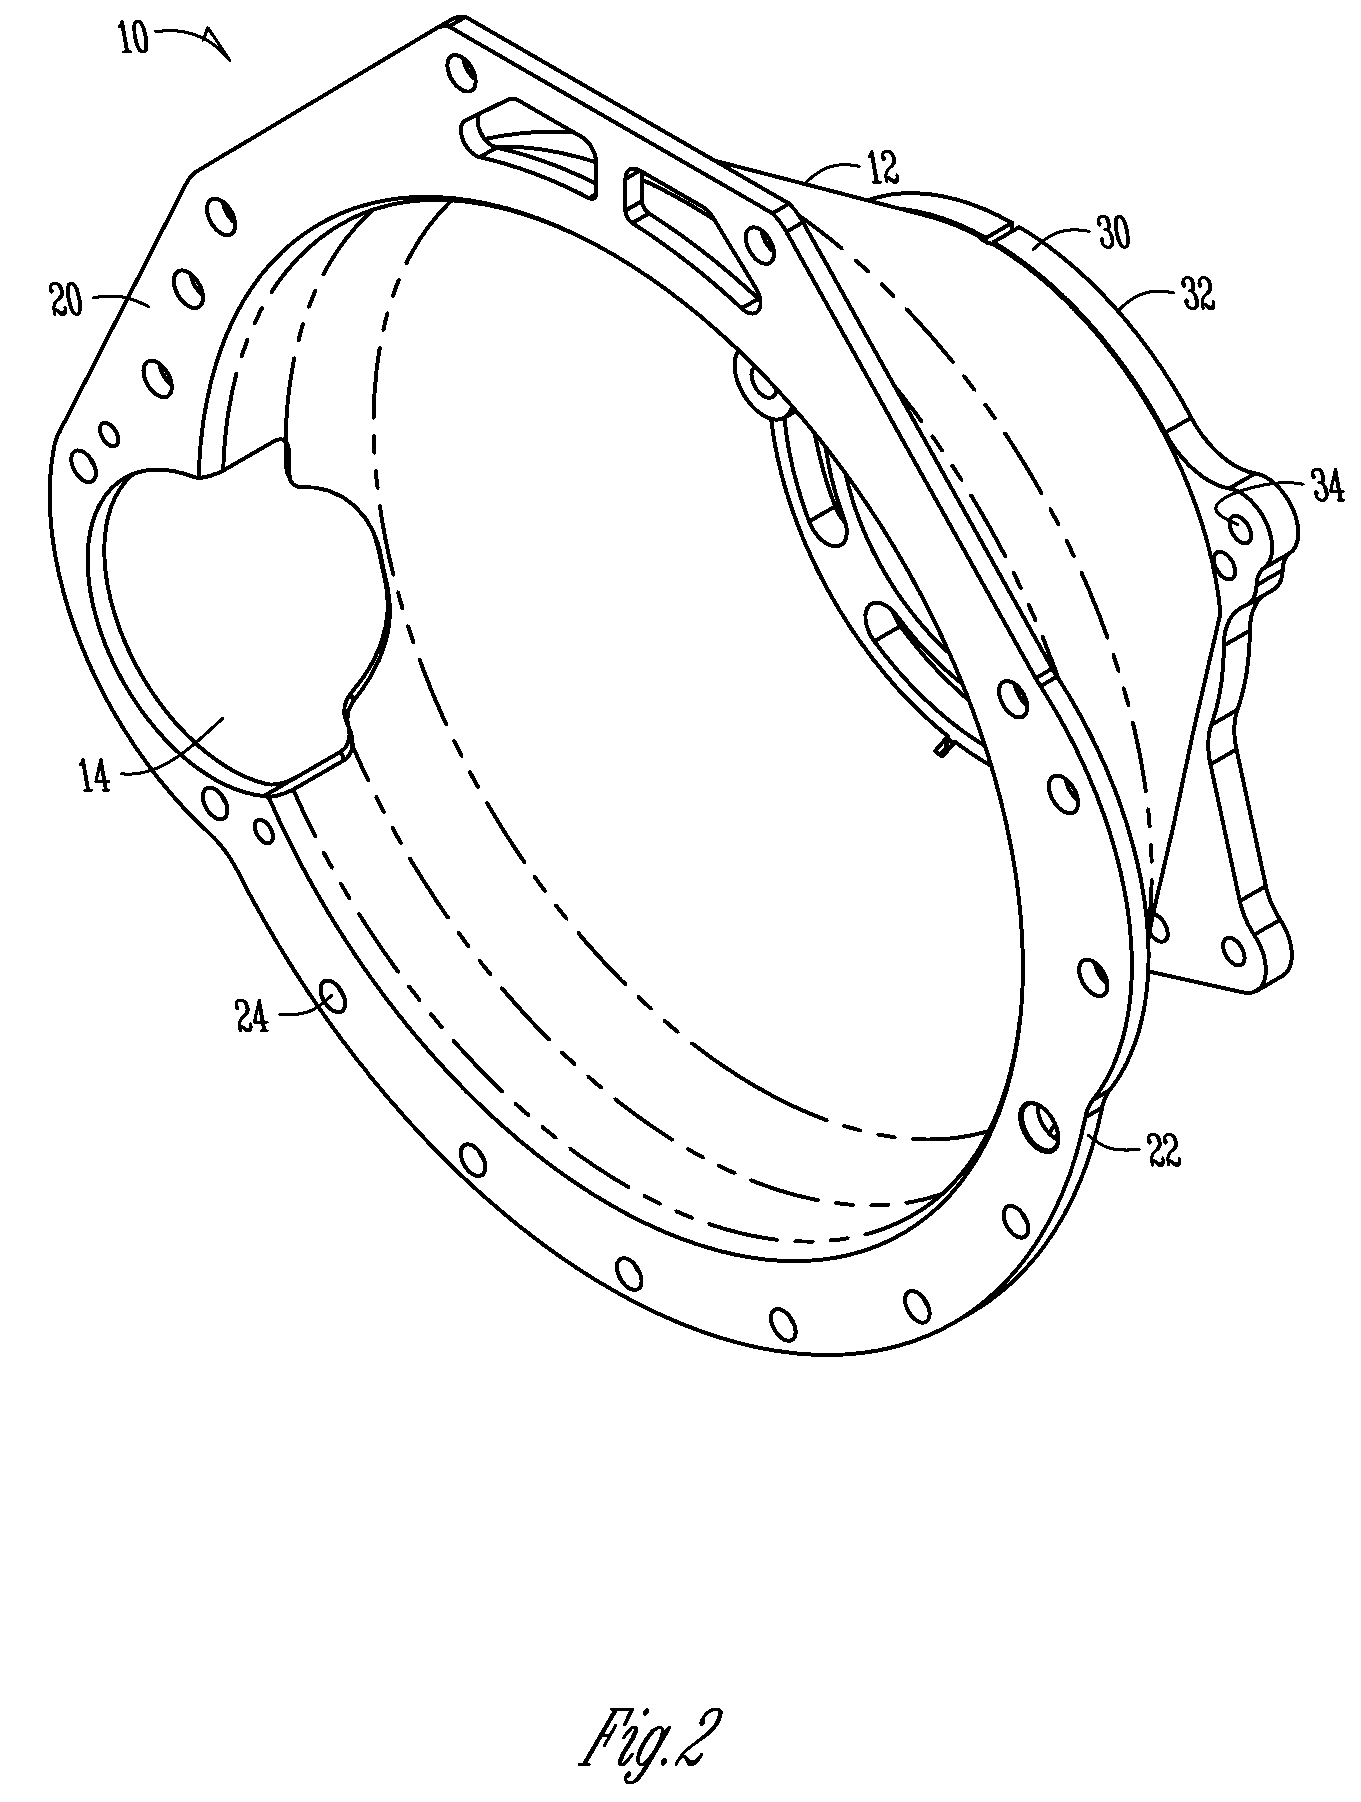 Method to provide a universal bellhousing between an engine and transmission of a vehicle